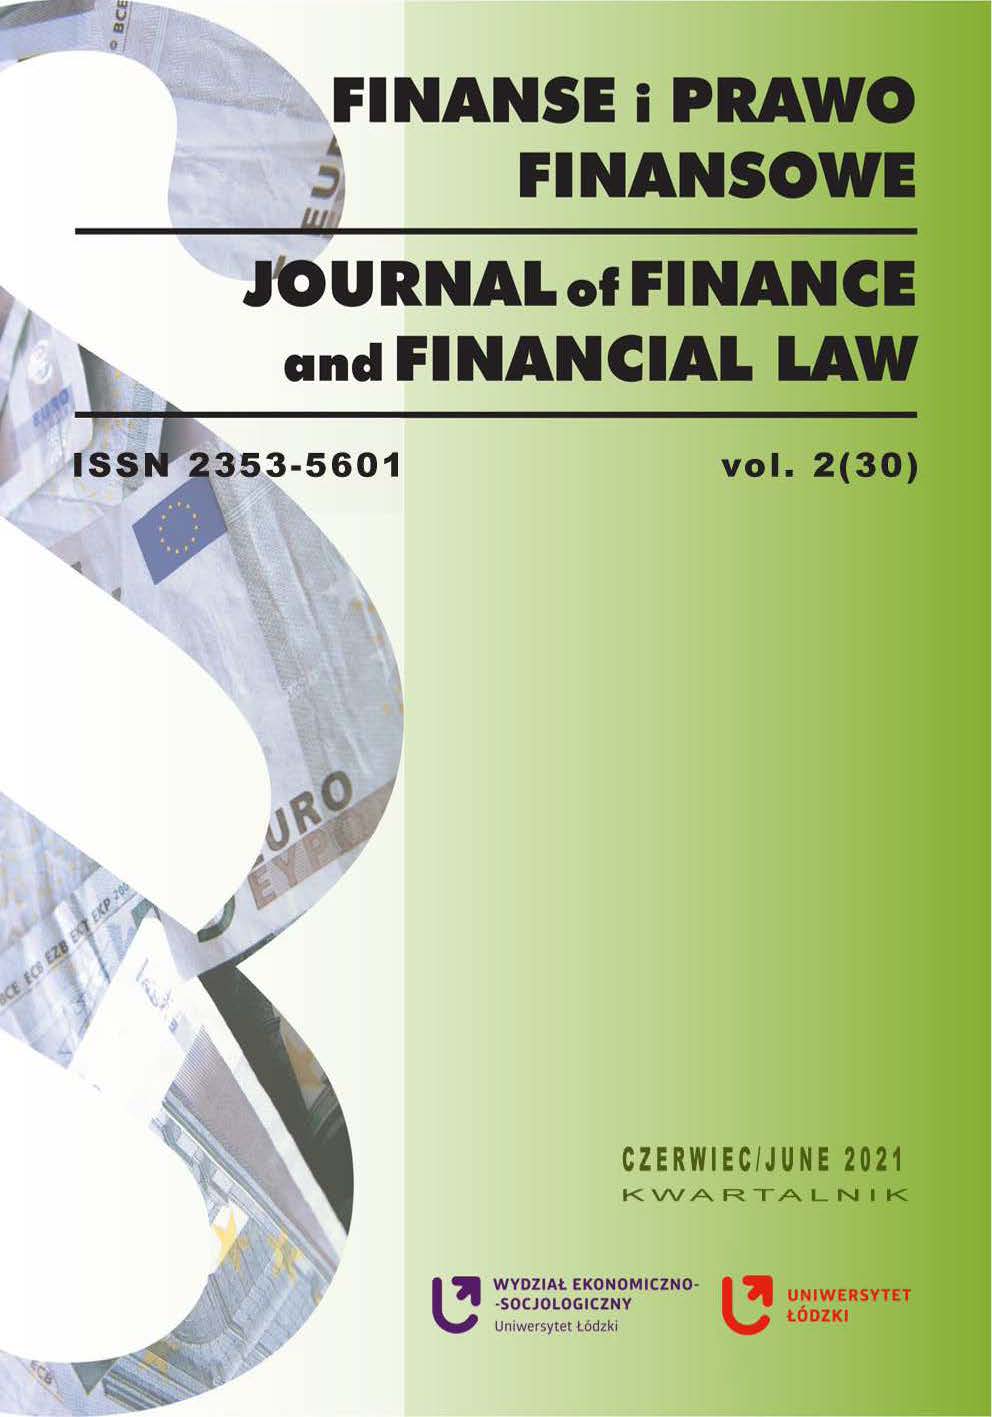 Evaluation of the Level of Financial Inclusion among Businesses from the Next 11 Group of Countries Cover Image